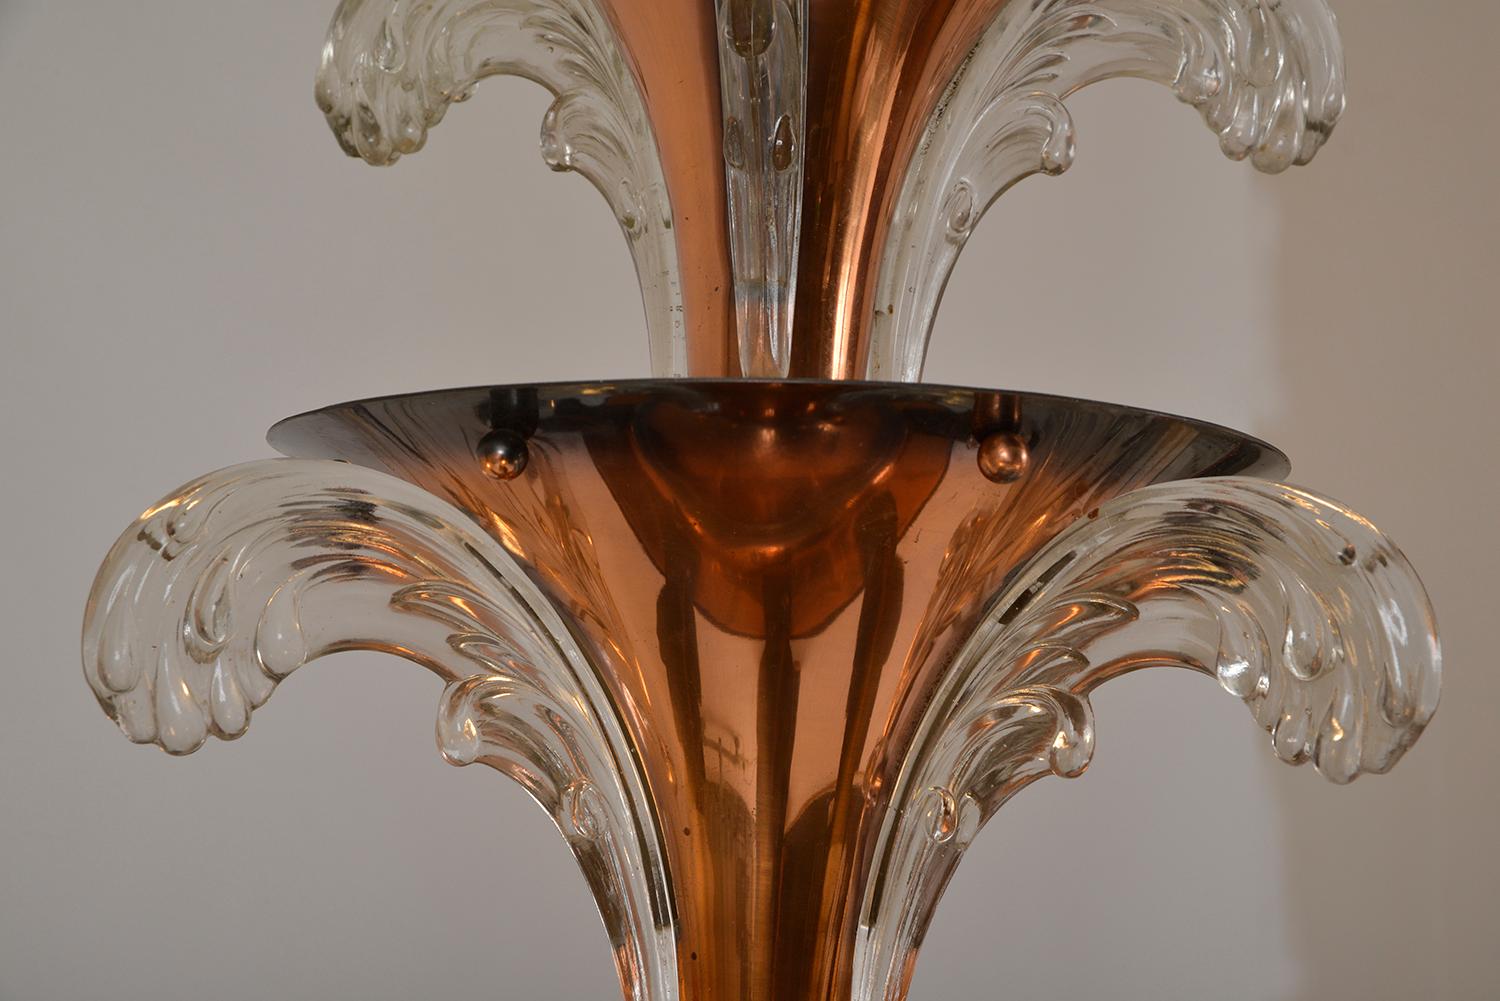 1930s French Art Deco 6-Arm Chandelier by Petitot and Ezan Copper and Glass For Sale 11